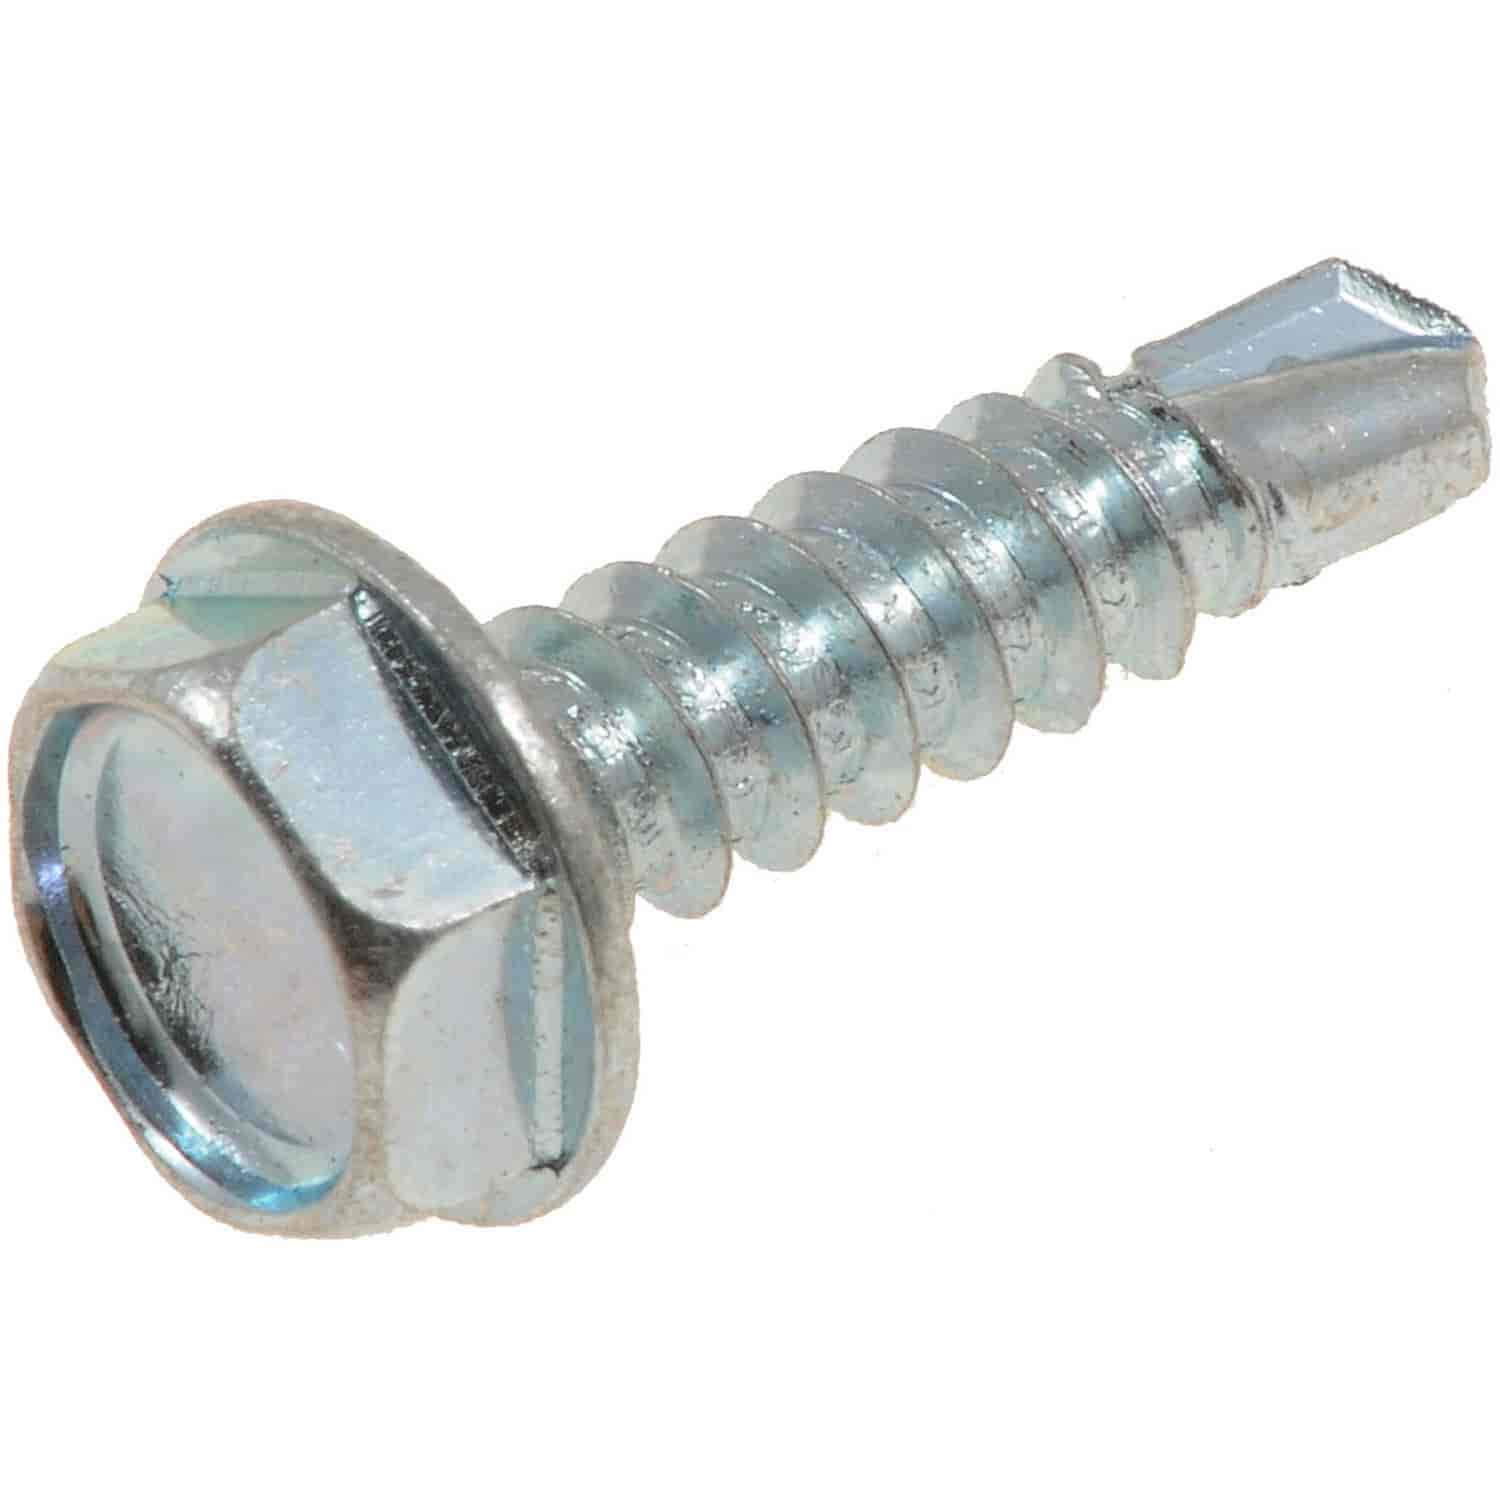 Self Tapping Screw-Hex Washer Head-No. 10 x 3/4 In.